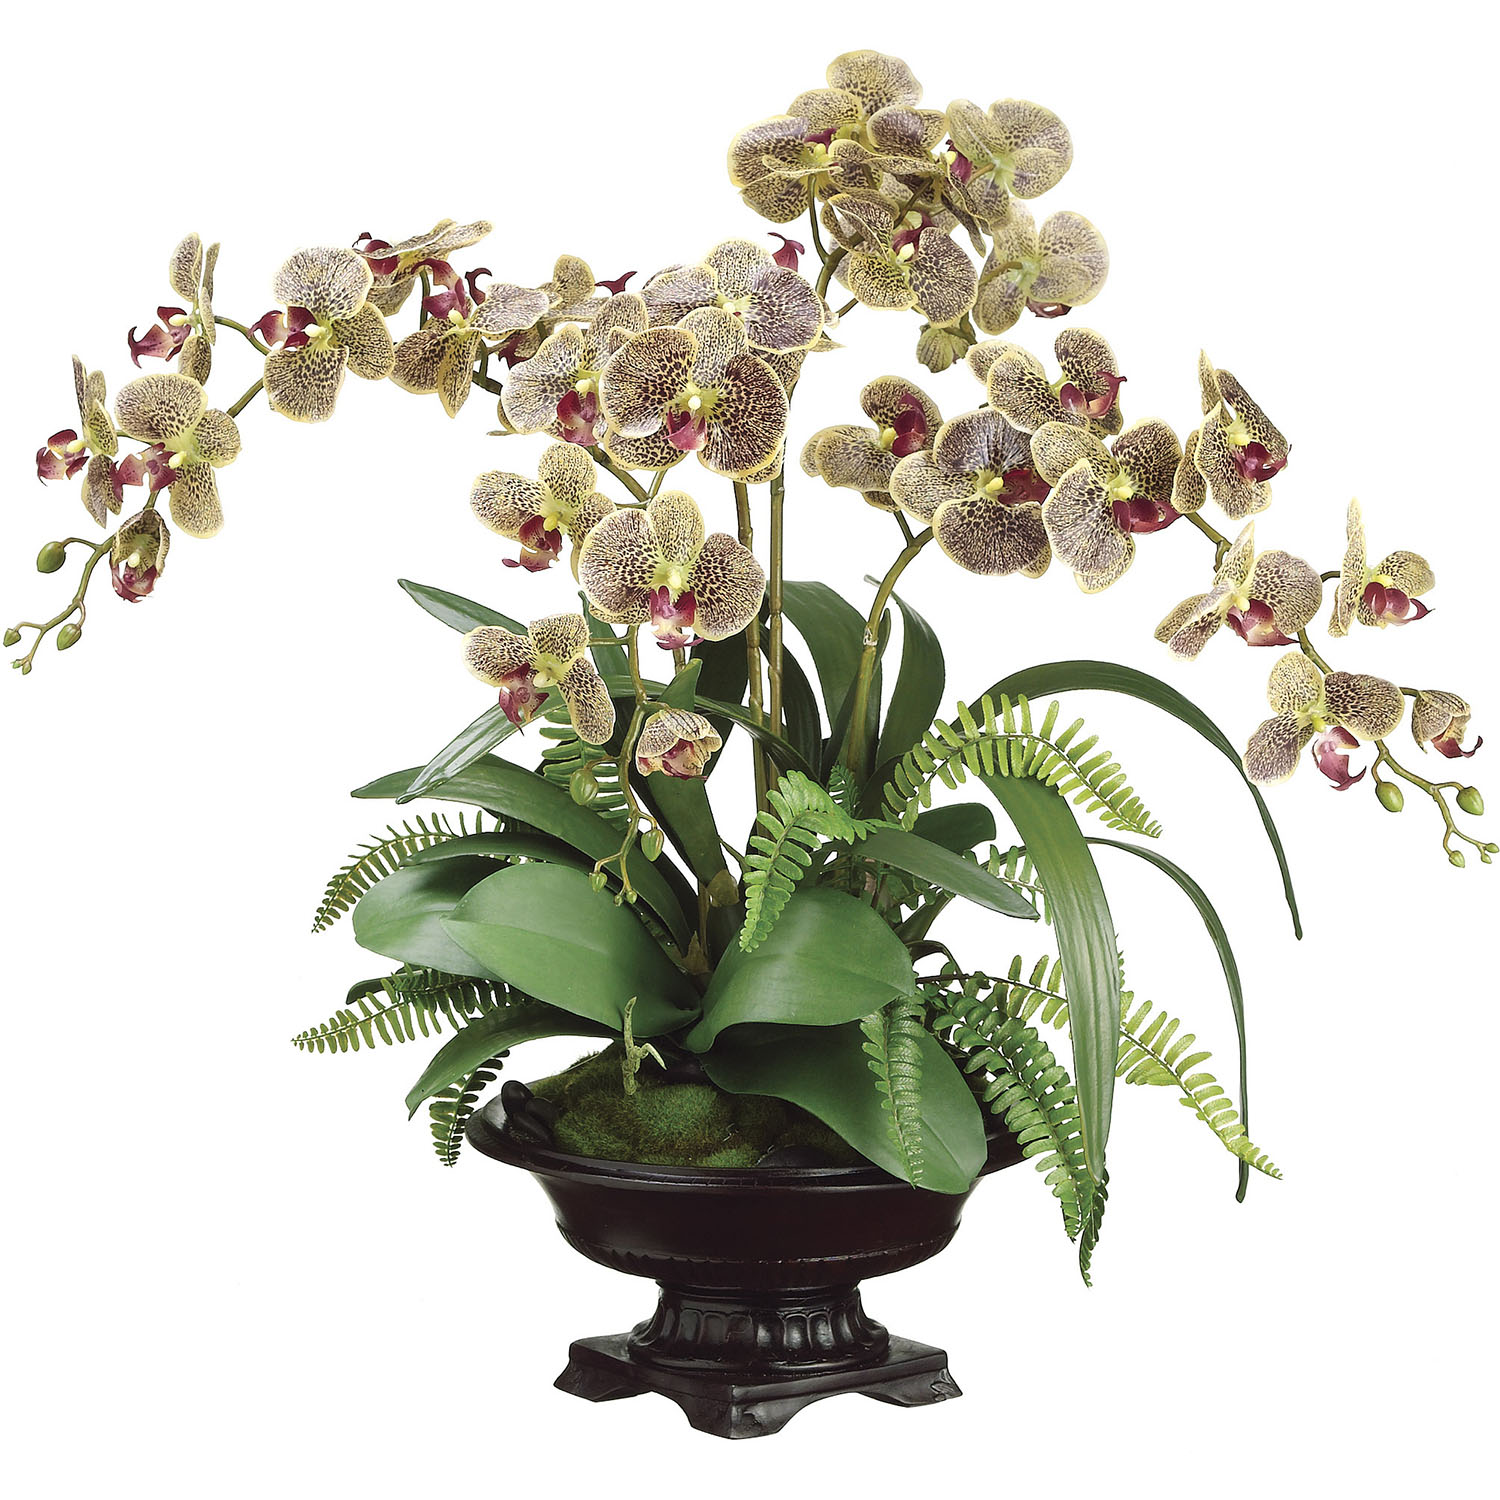 27 Inch Phalaenopsis Orchid, Boston Fern, And Moss In Bowl